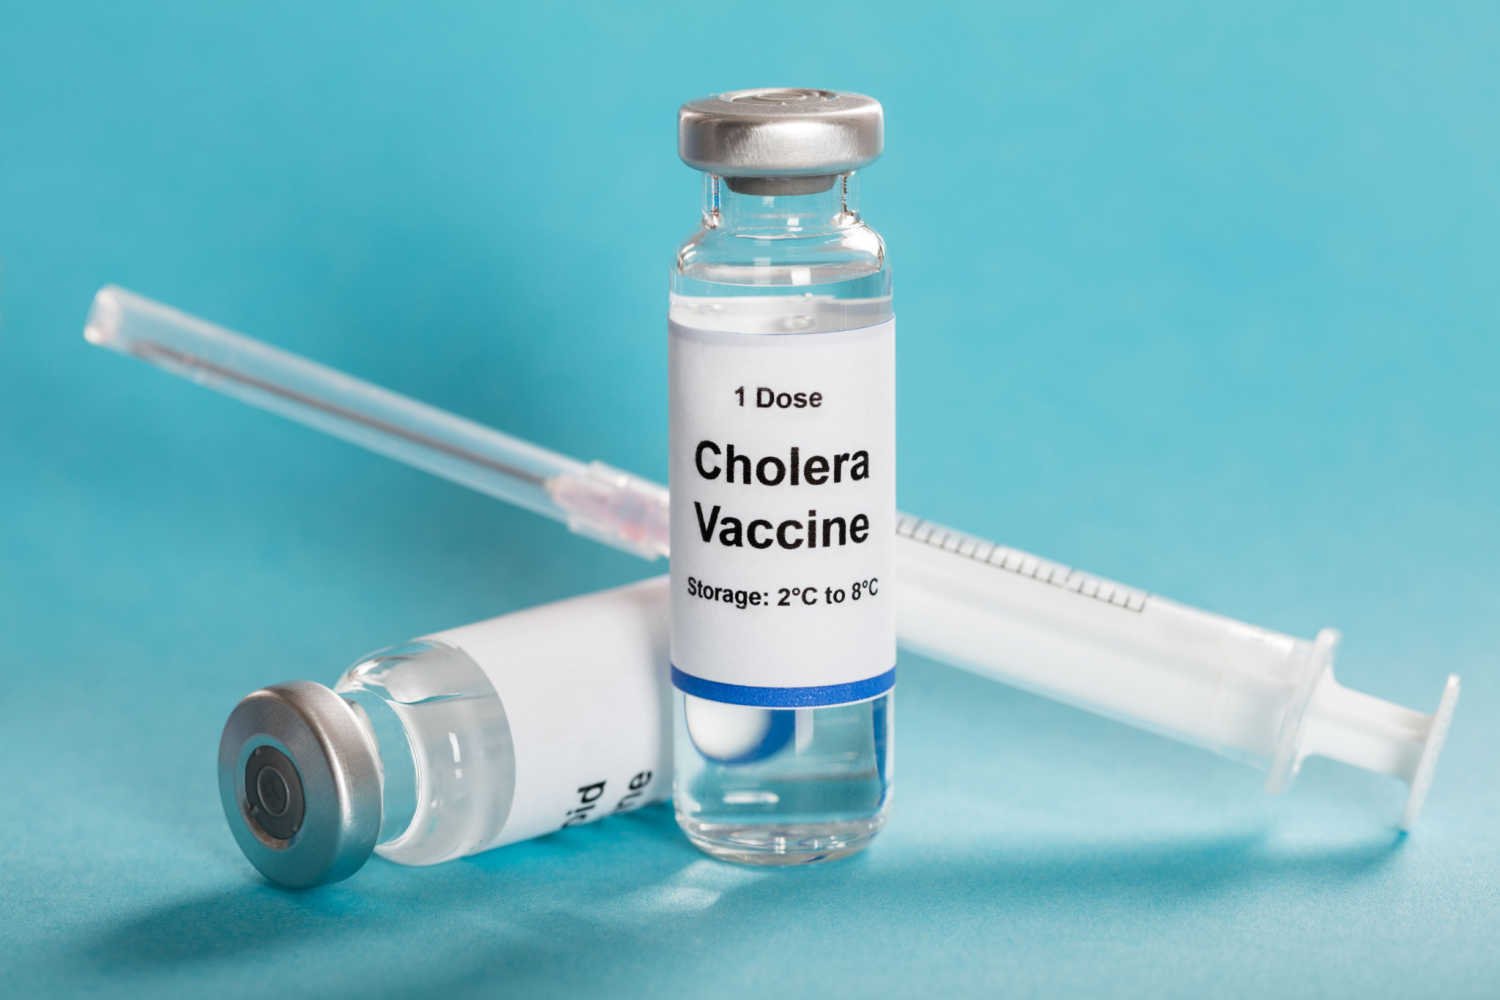 Cholera Vaccine For Toddlers – Benefits and Side Effects